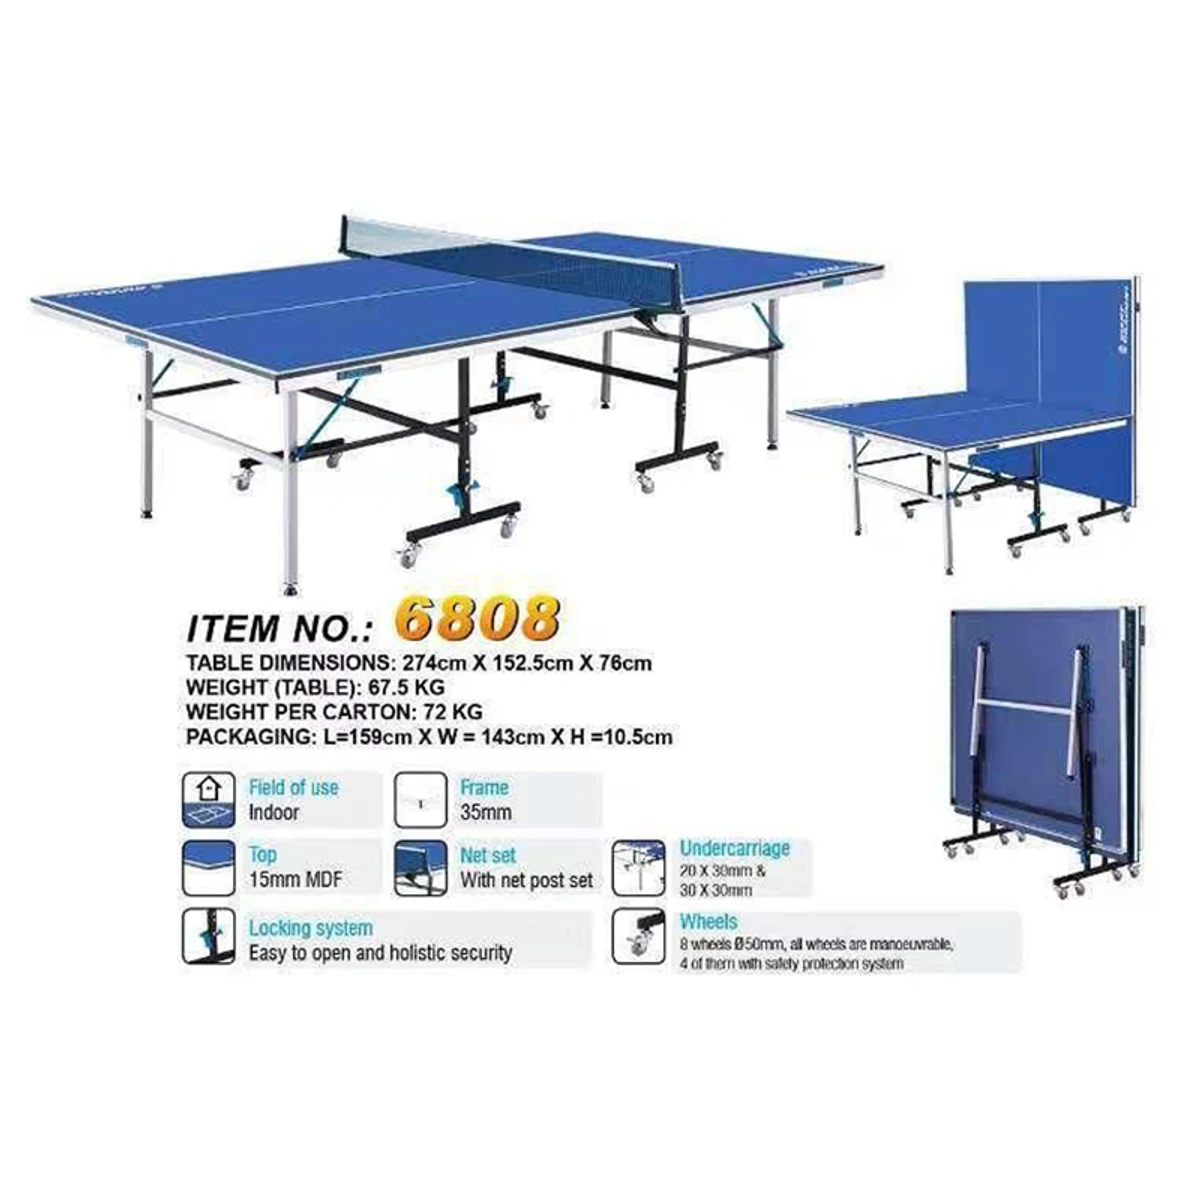 Giant Dragon 6808 Foldable movable Table Tennis Board